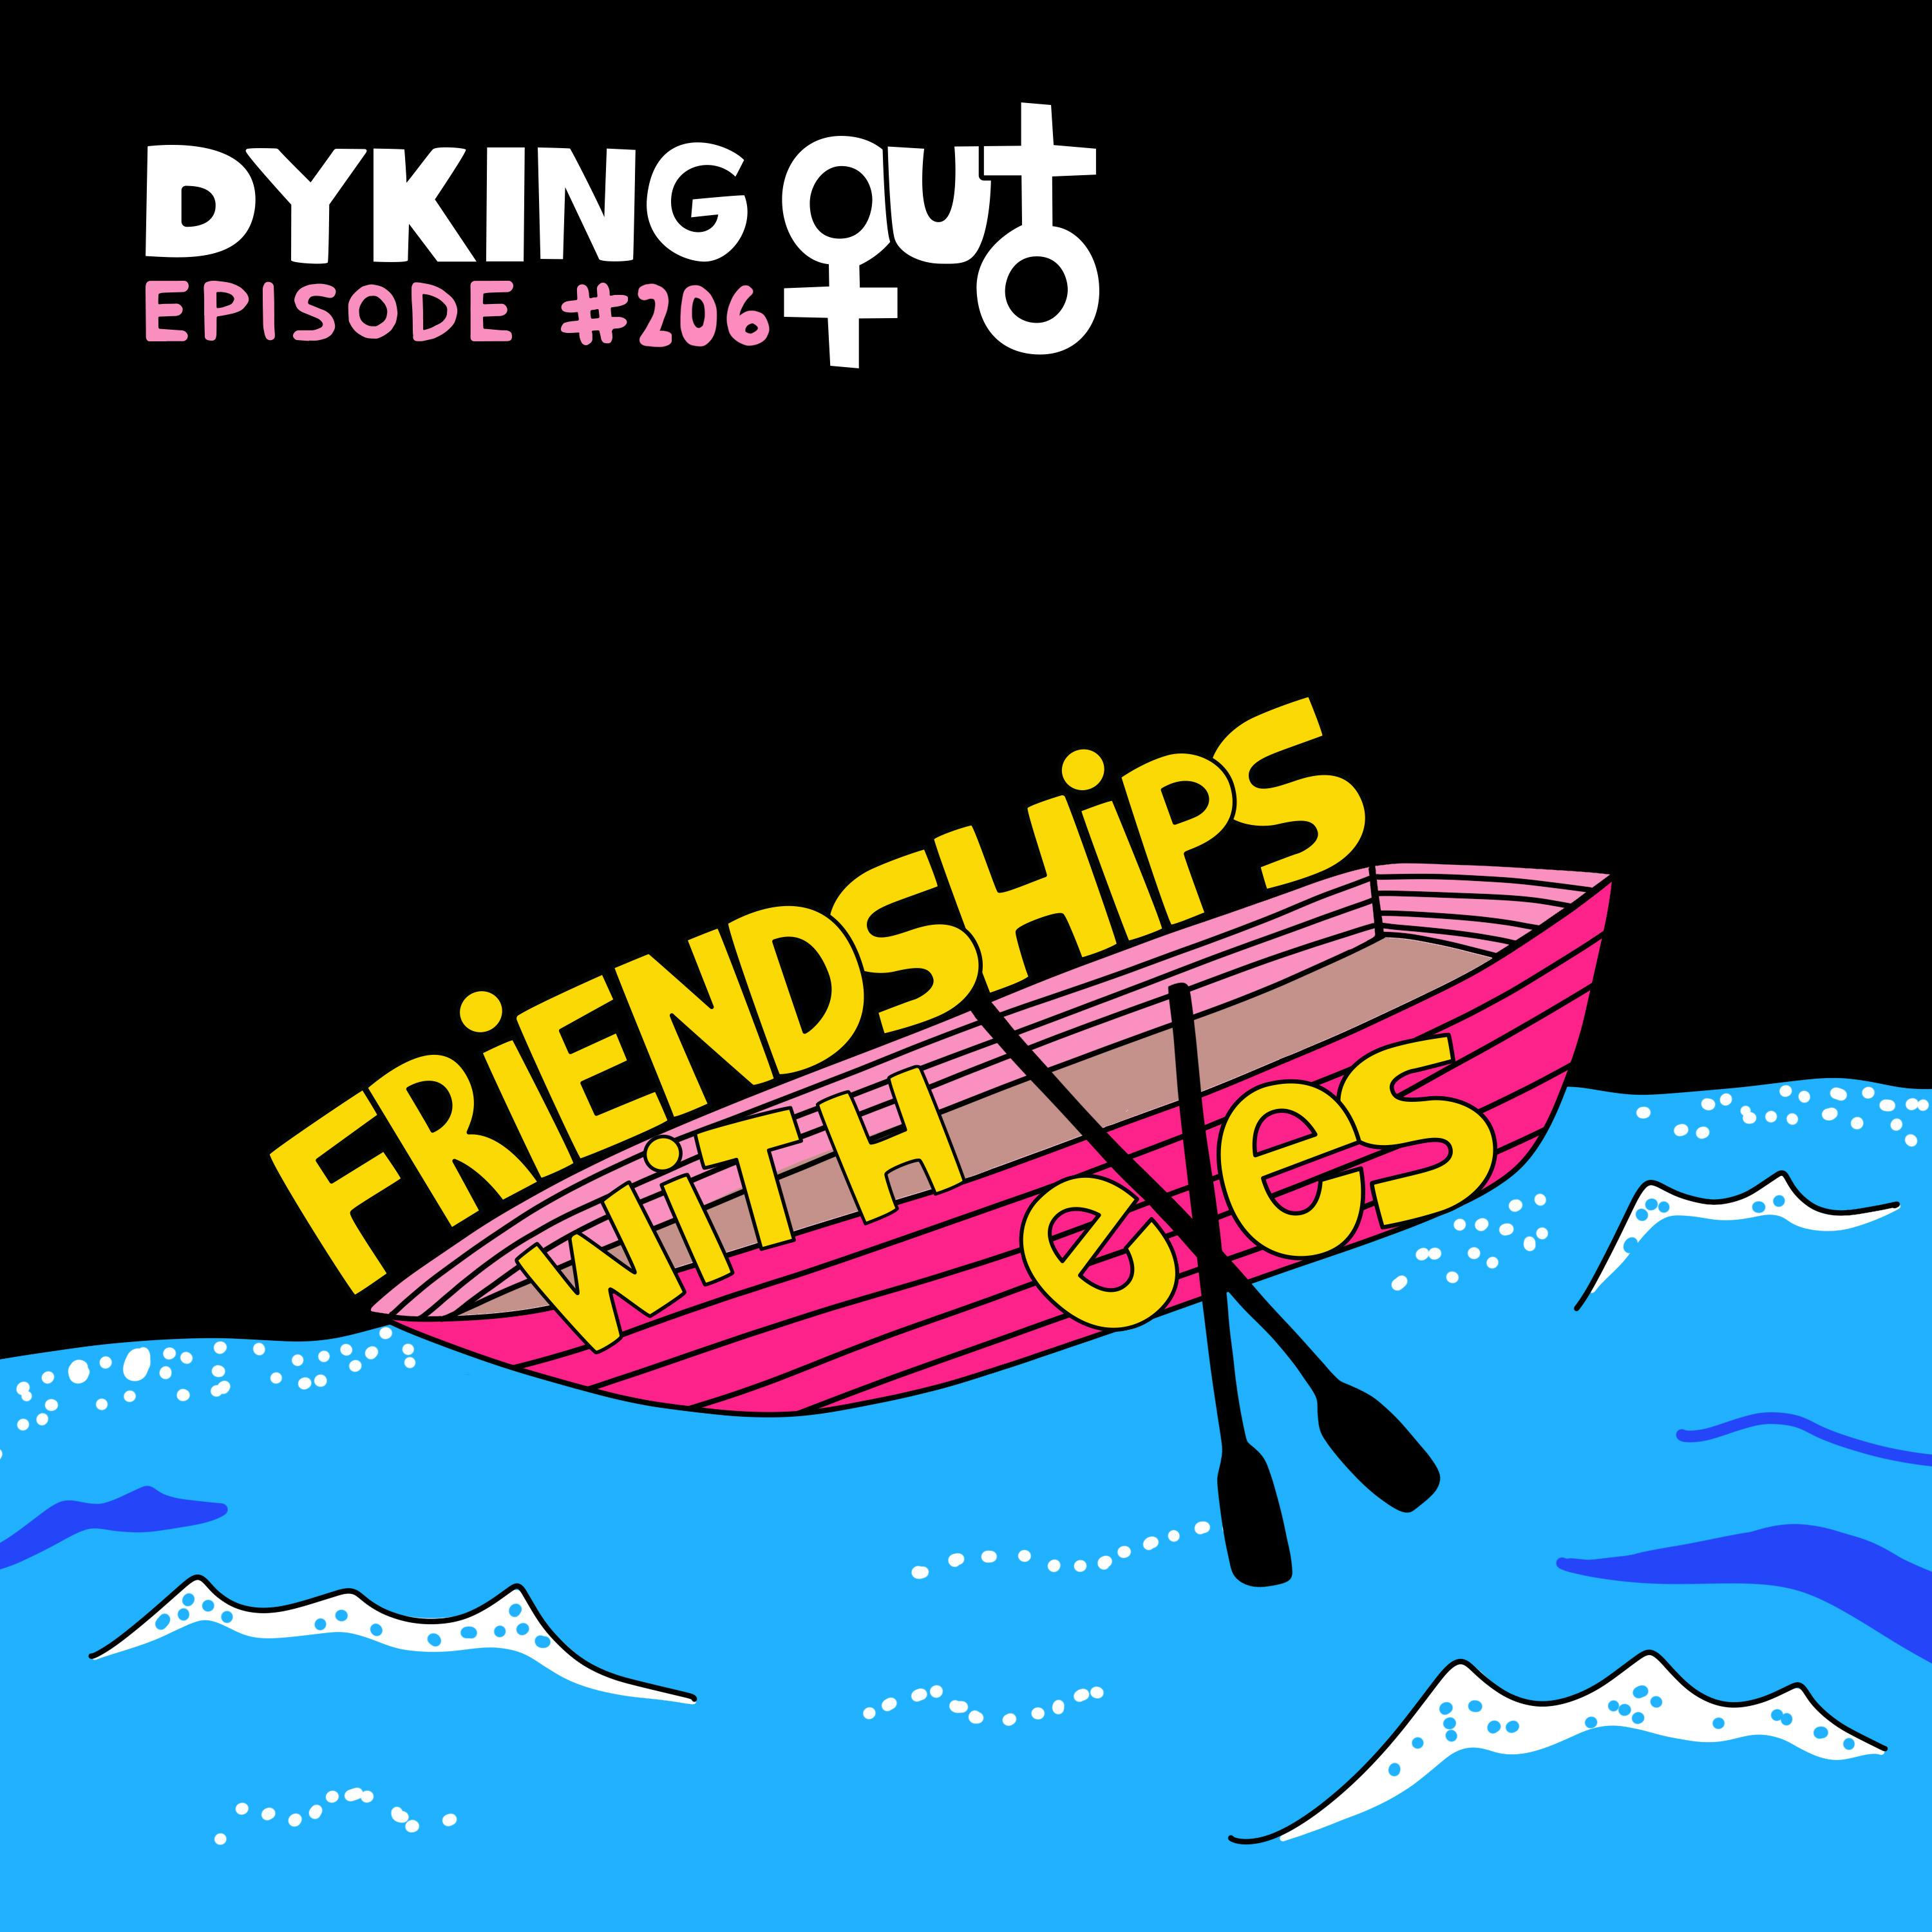 Friendships With Exes w/ Christina Cauterucci - Ep. 206